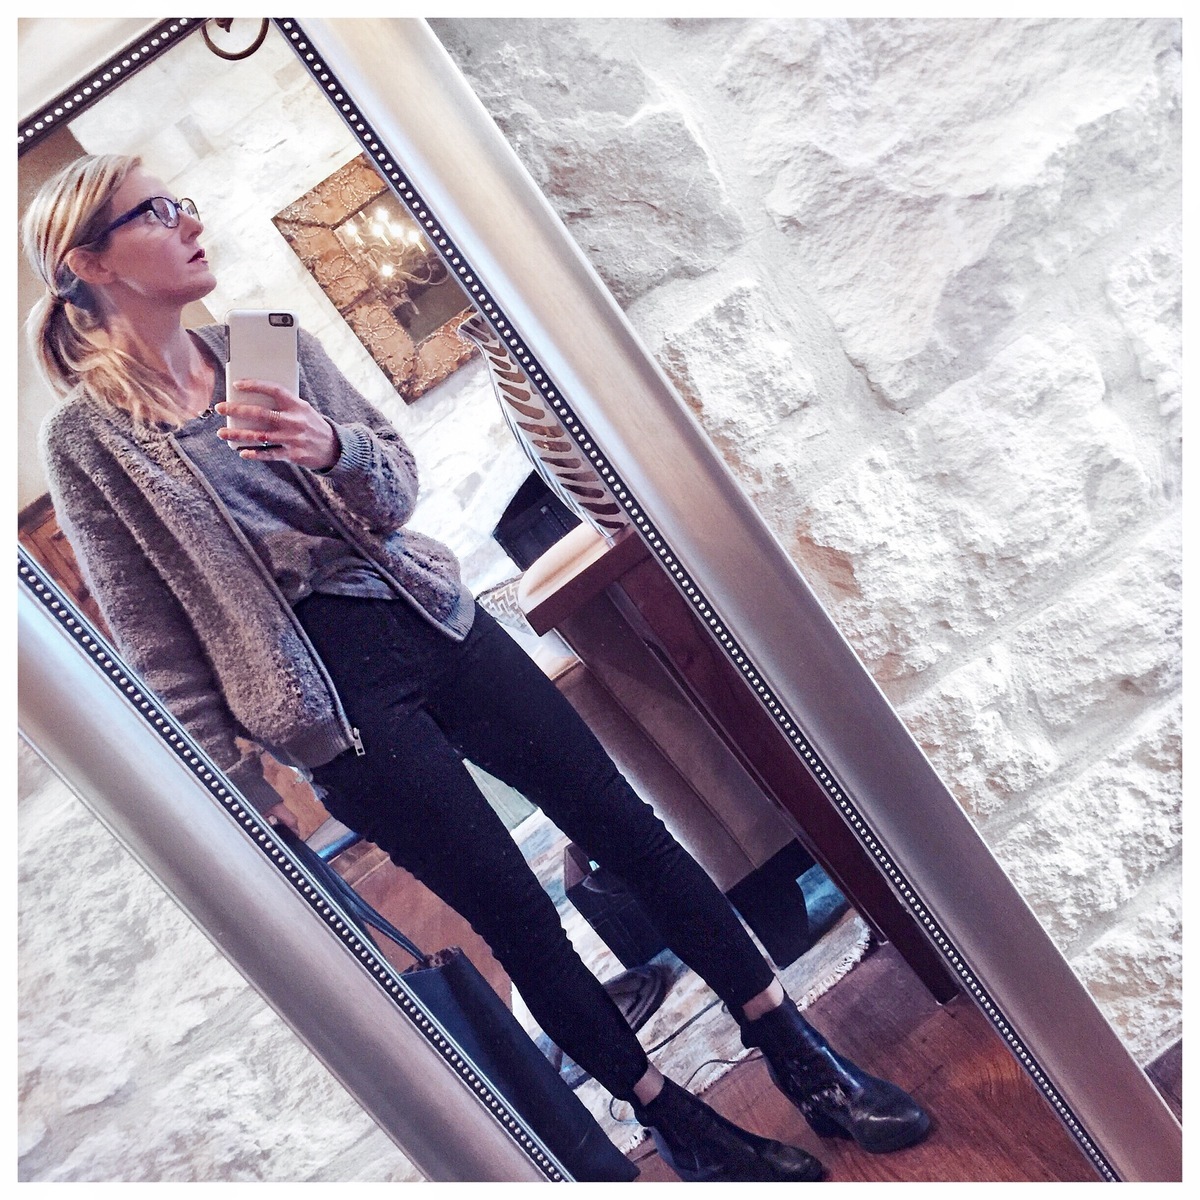 A go-to color combo: black and gray. My comfy WHo What Wear bomber sweater jacket over a gray heathered t-shirt, with black distressed jeans by madewell and some ash wedge booties from nordstrom and shopbop